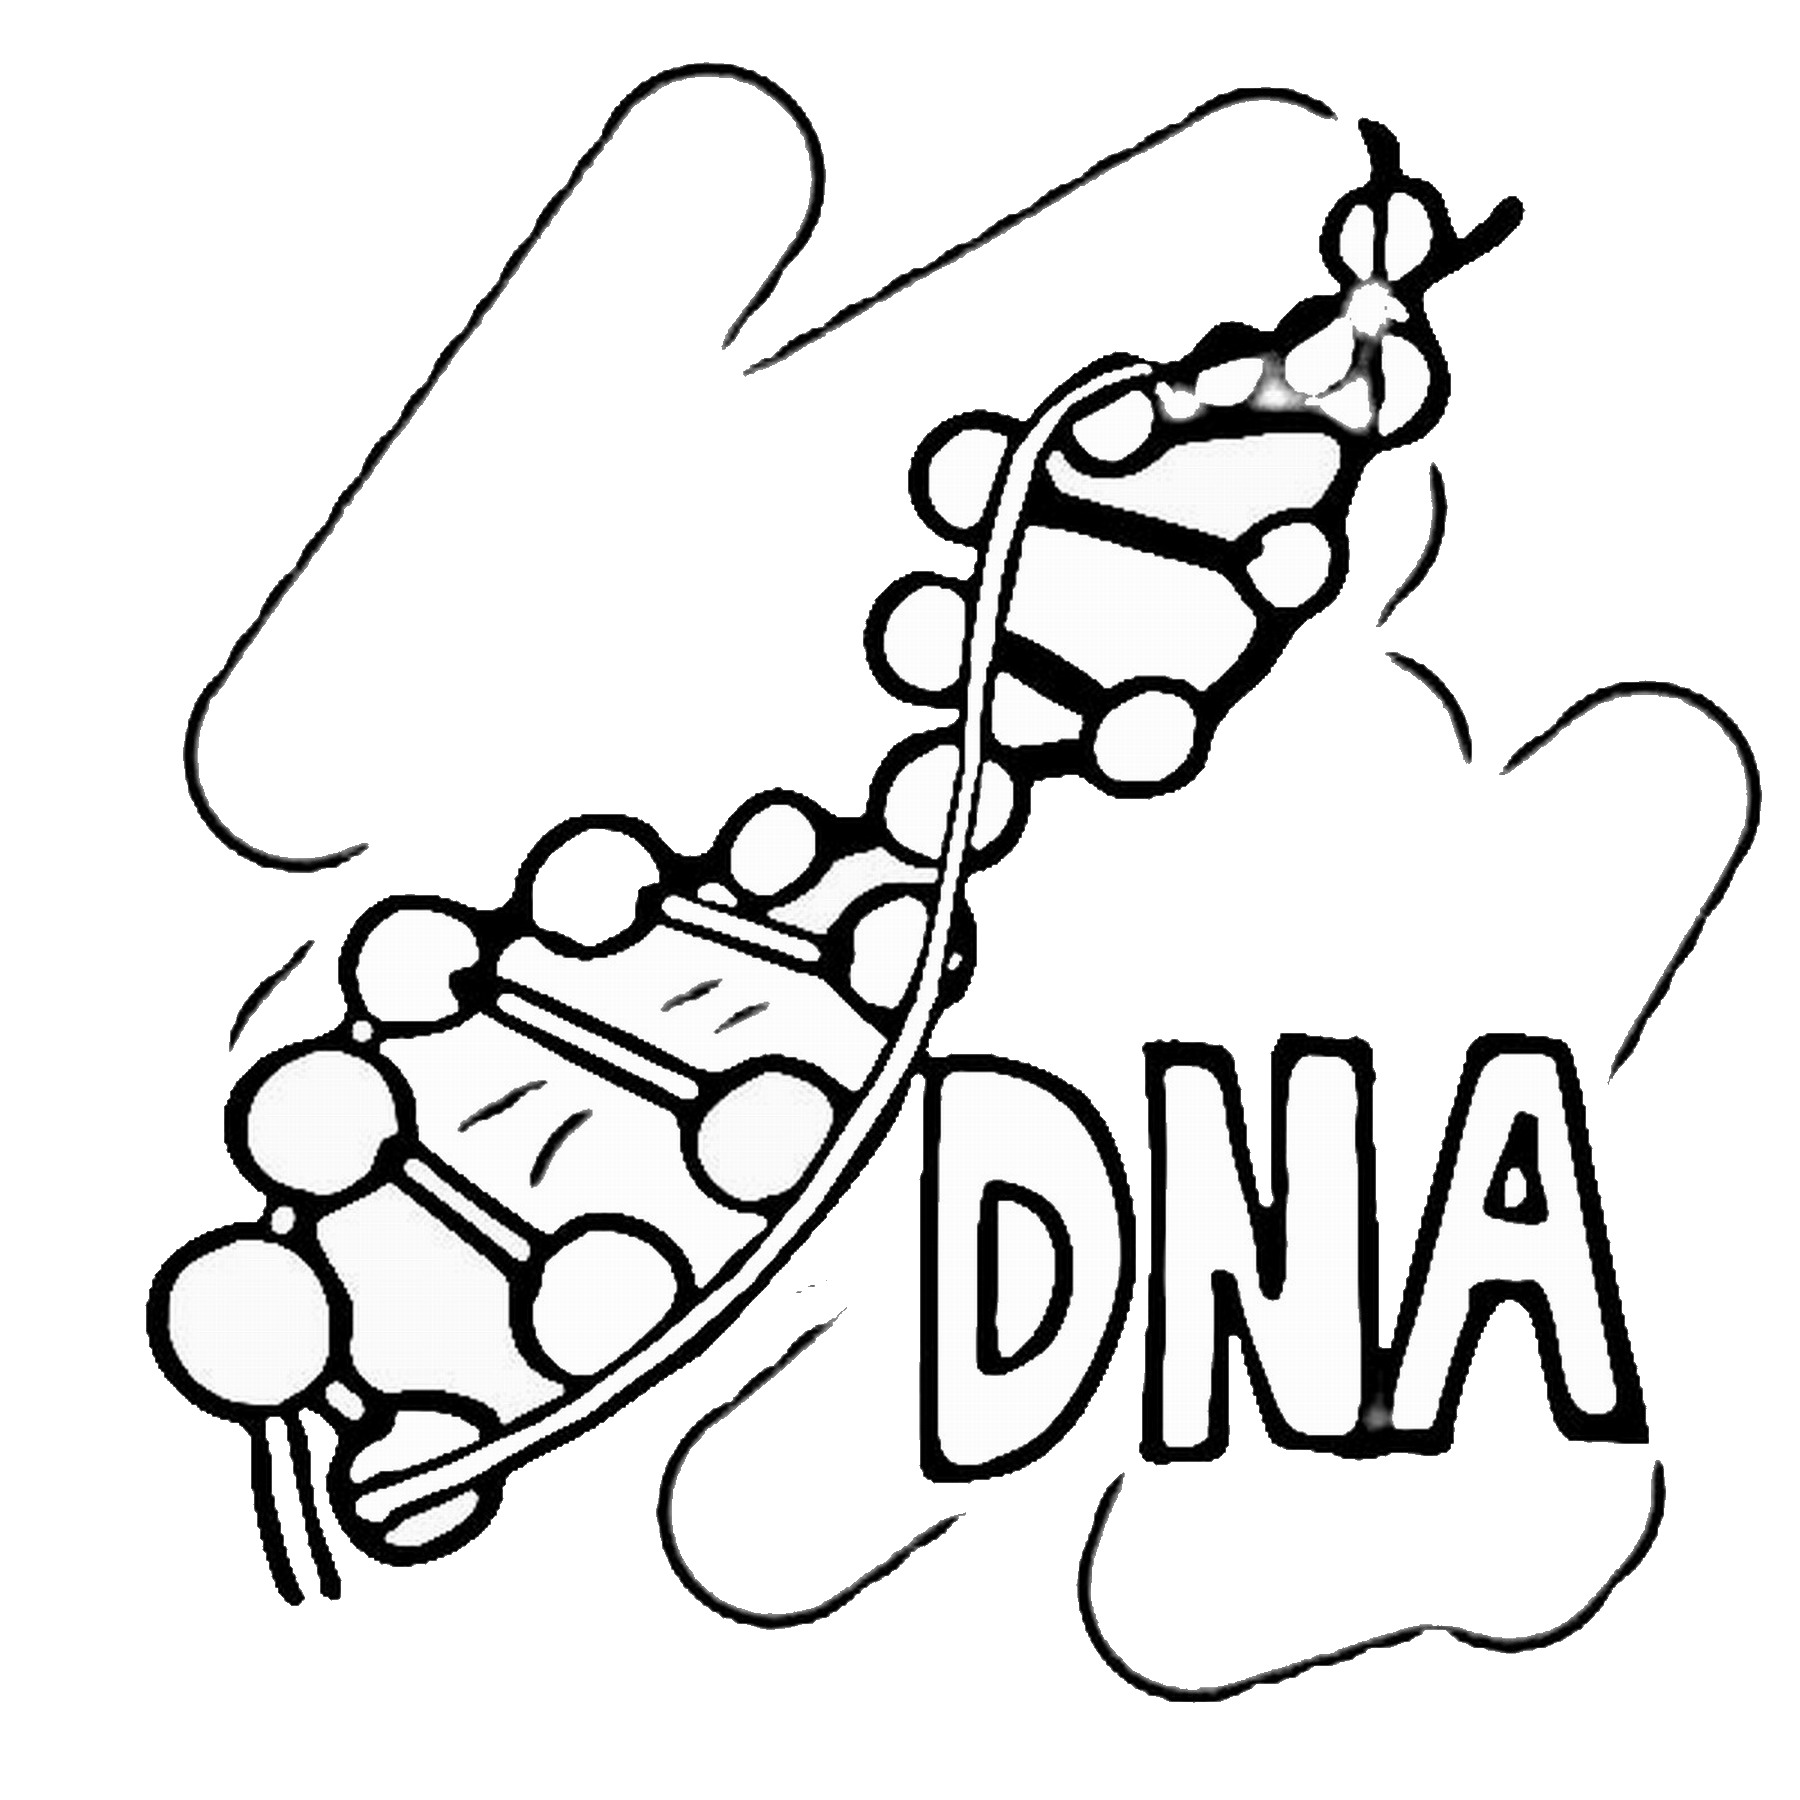 science themed coloring pages science themed coloring pages coloring online science themed pages coloring 